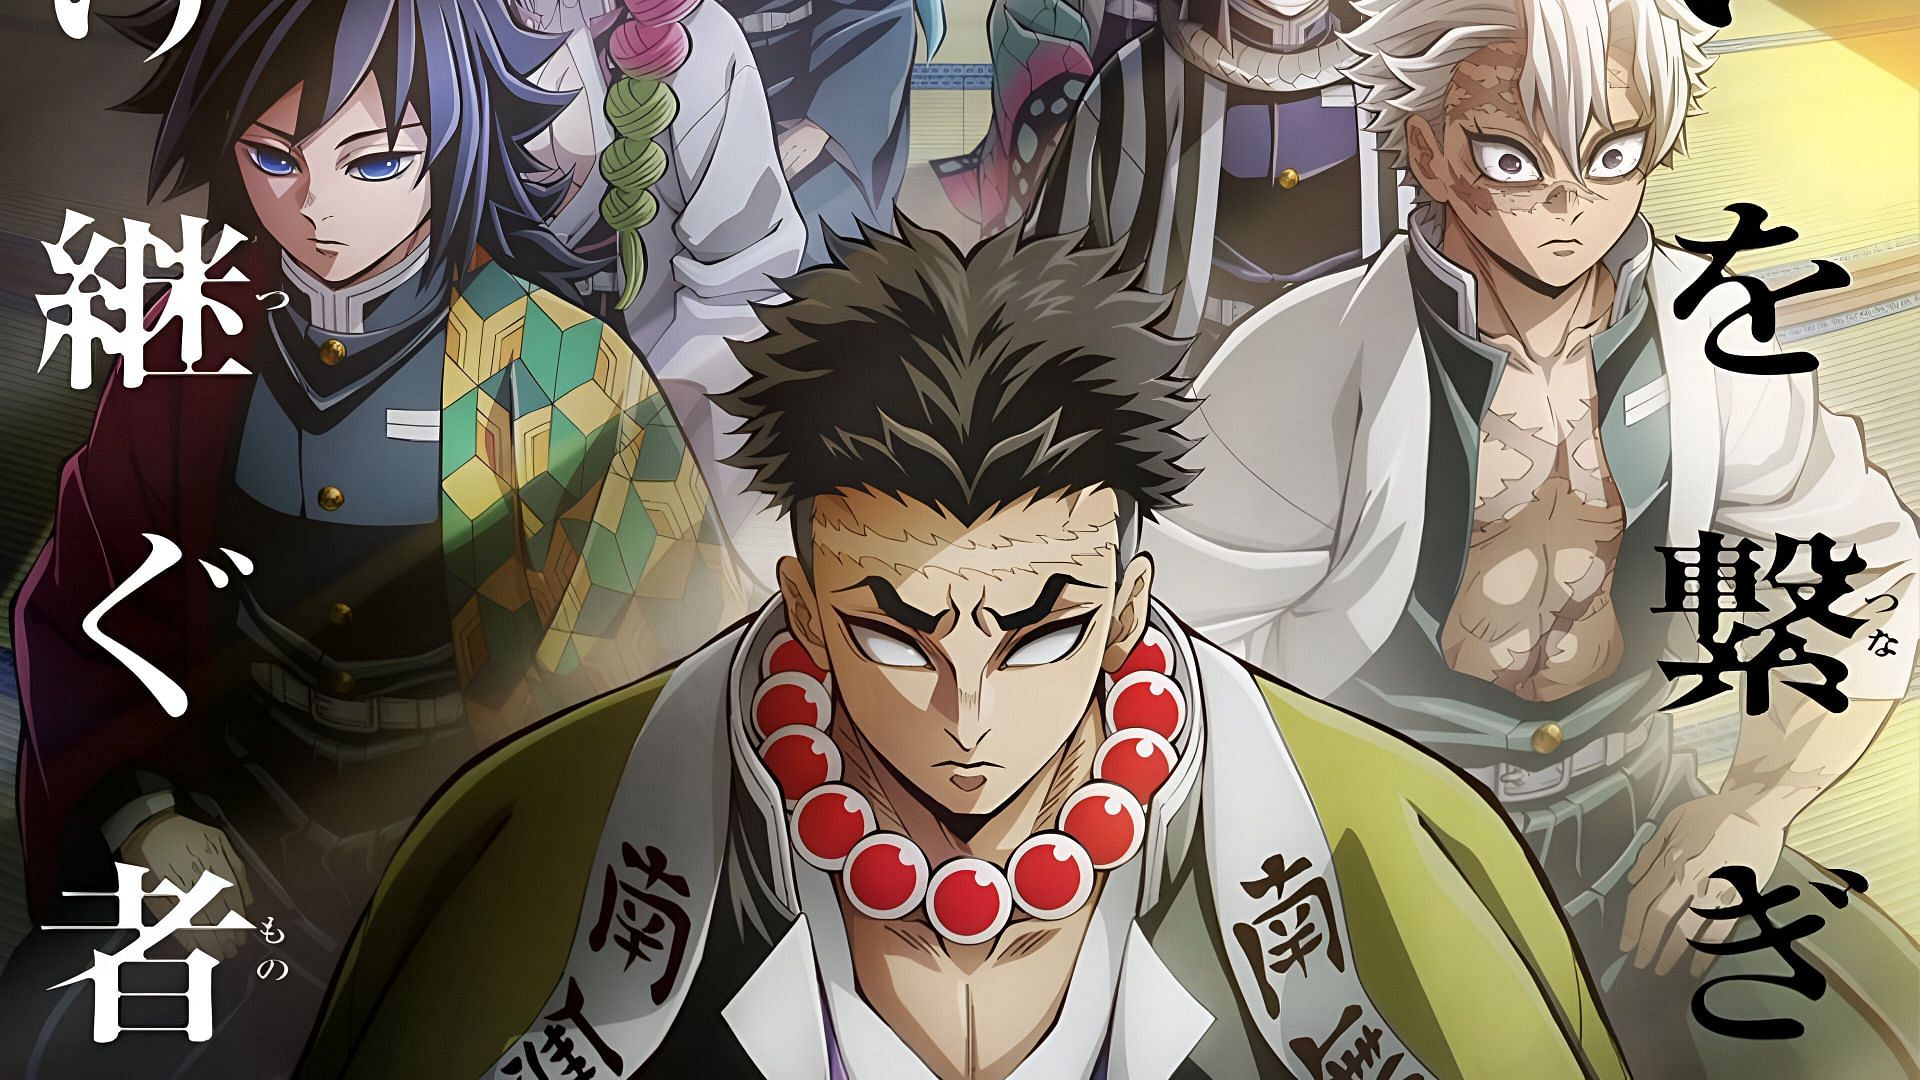 Gyomei and other Hashiras as seen in the anime series (Image via Ufotable)